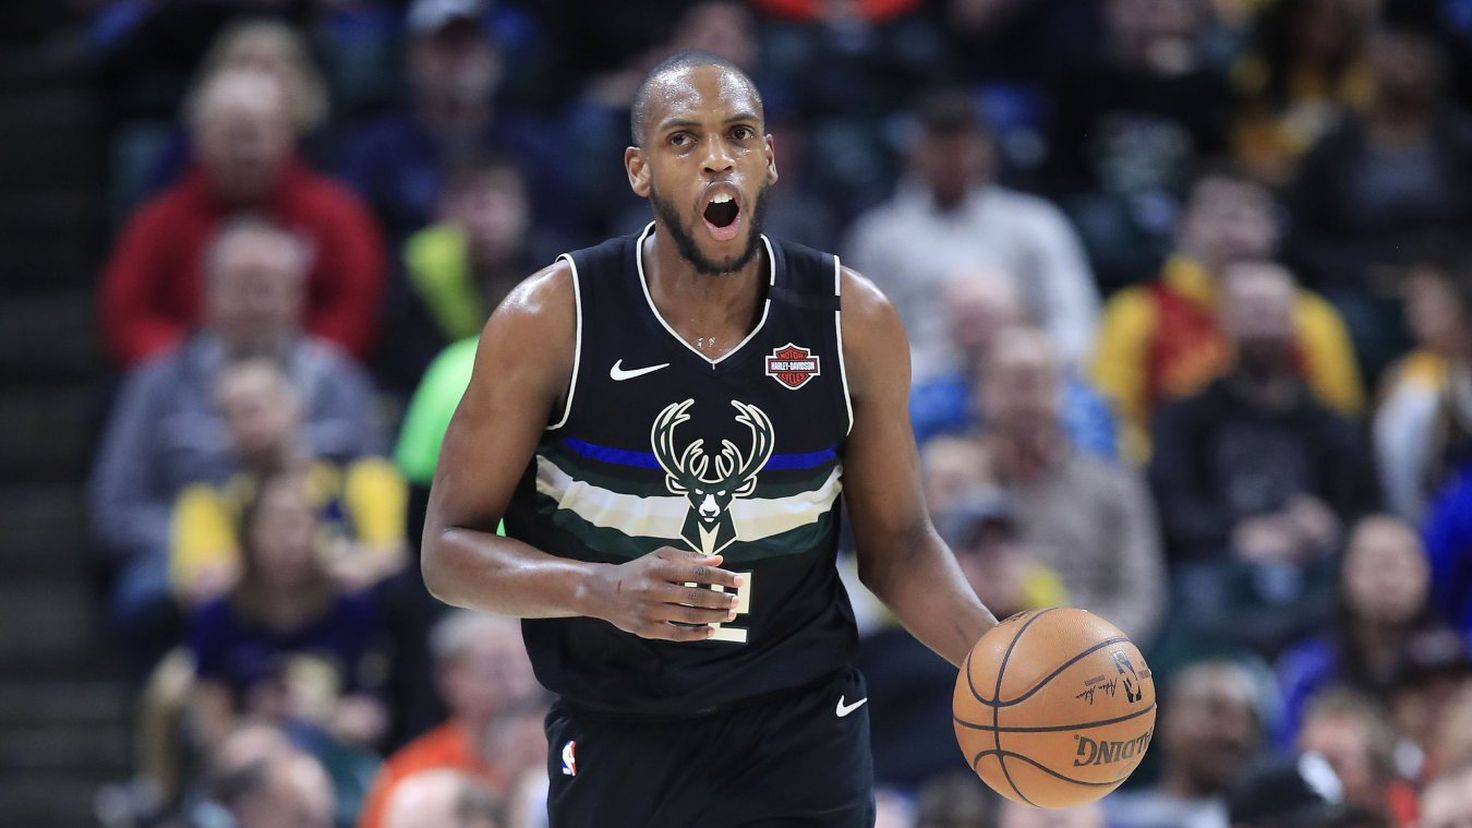 Expensive renovations in the NBA: Middleton, Grant, Poeltl...
